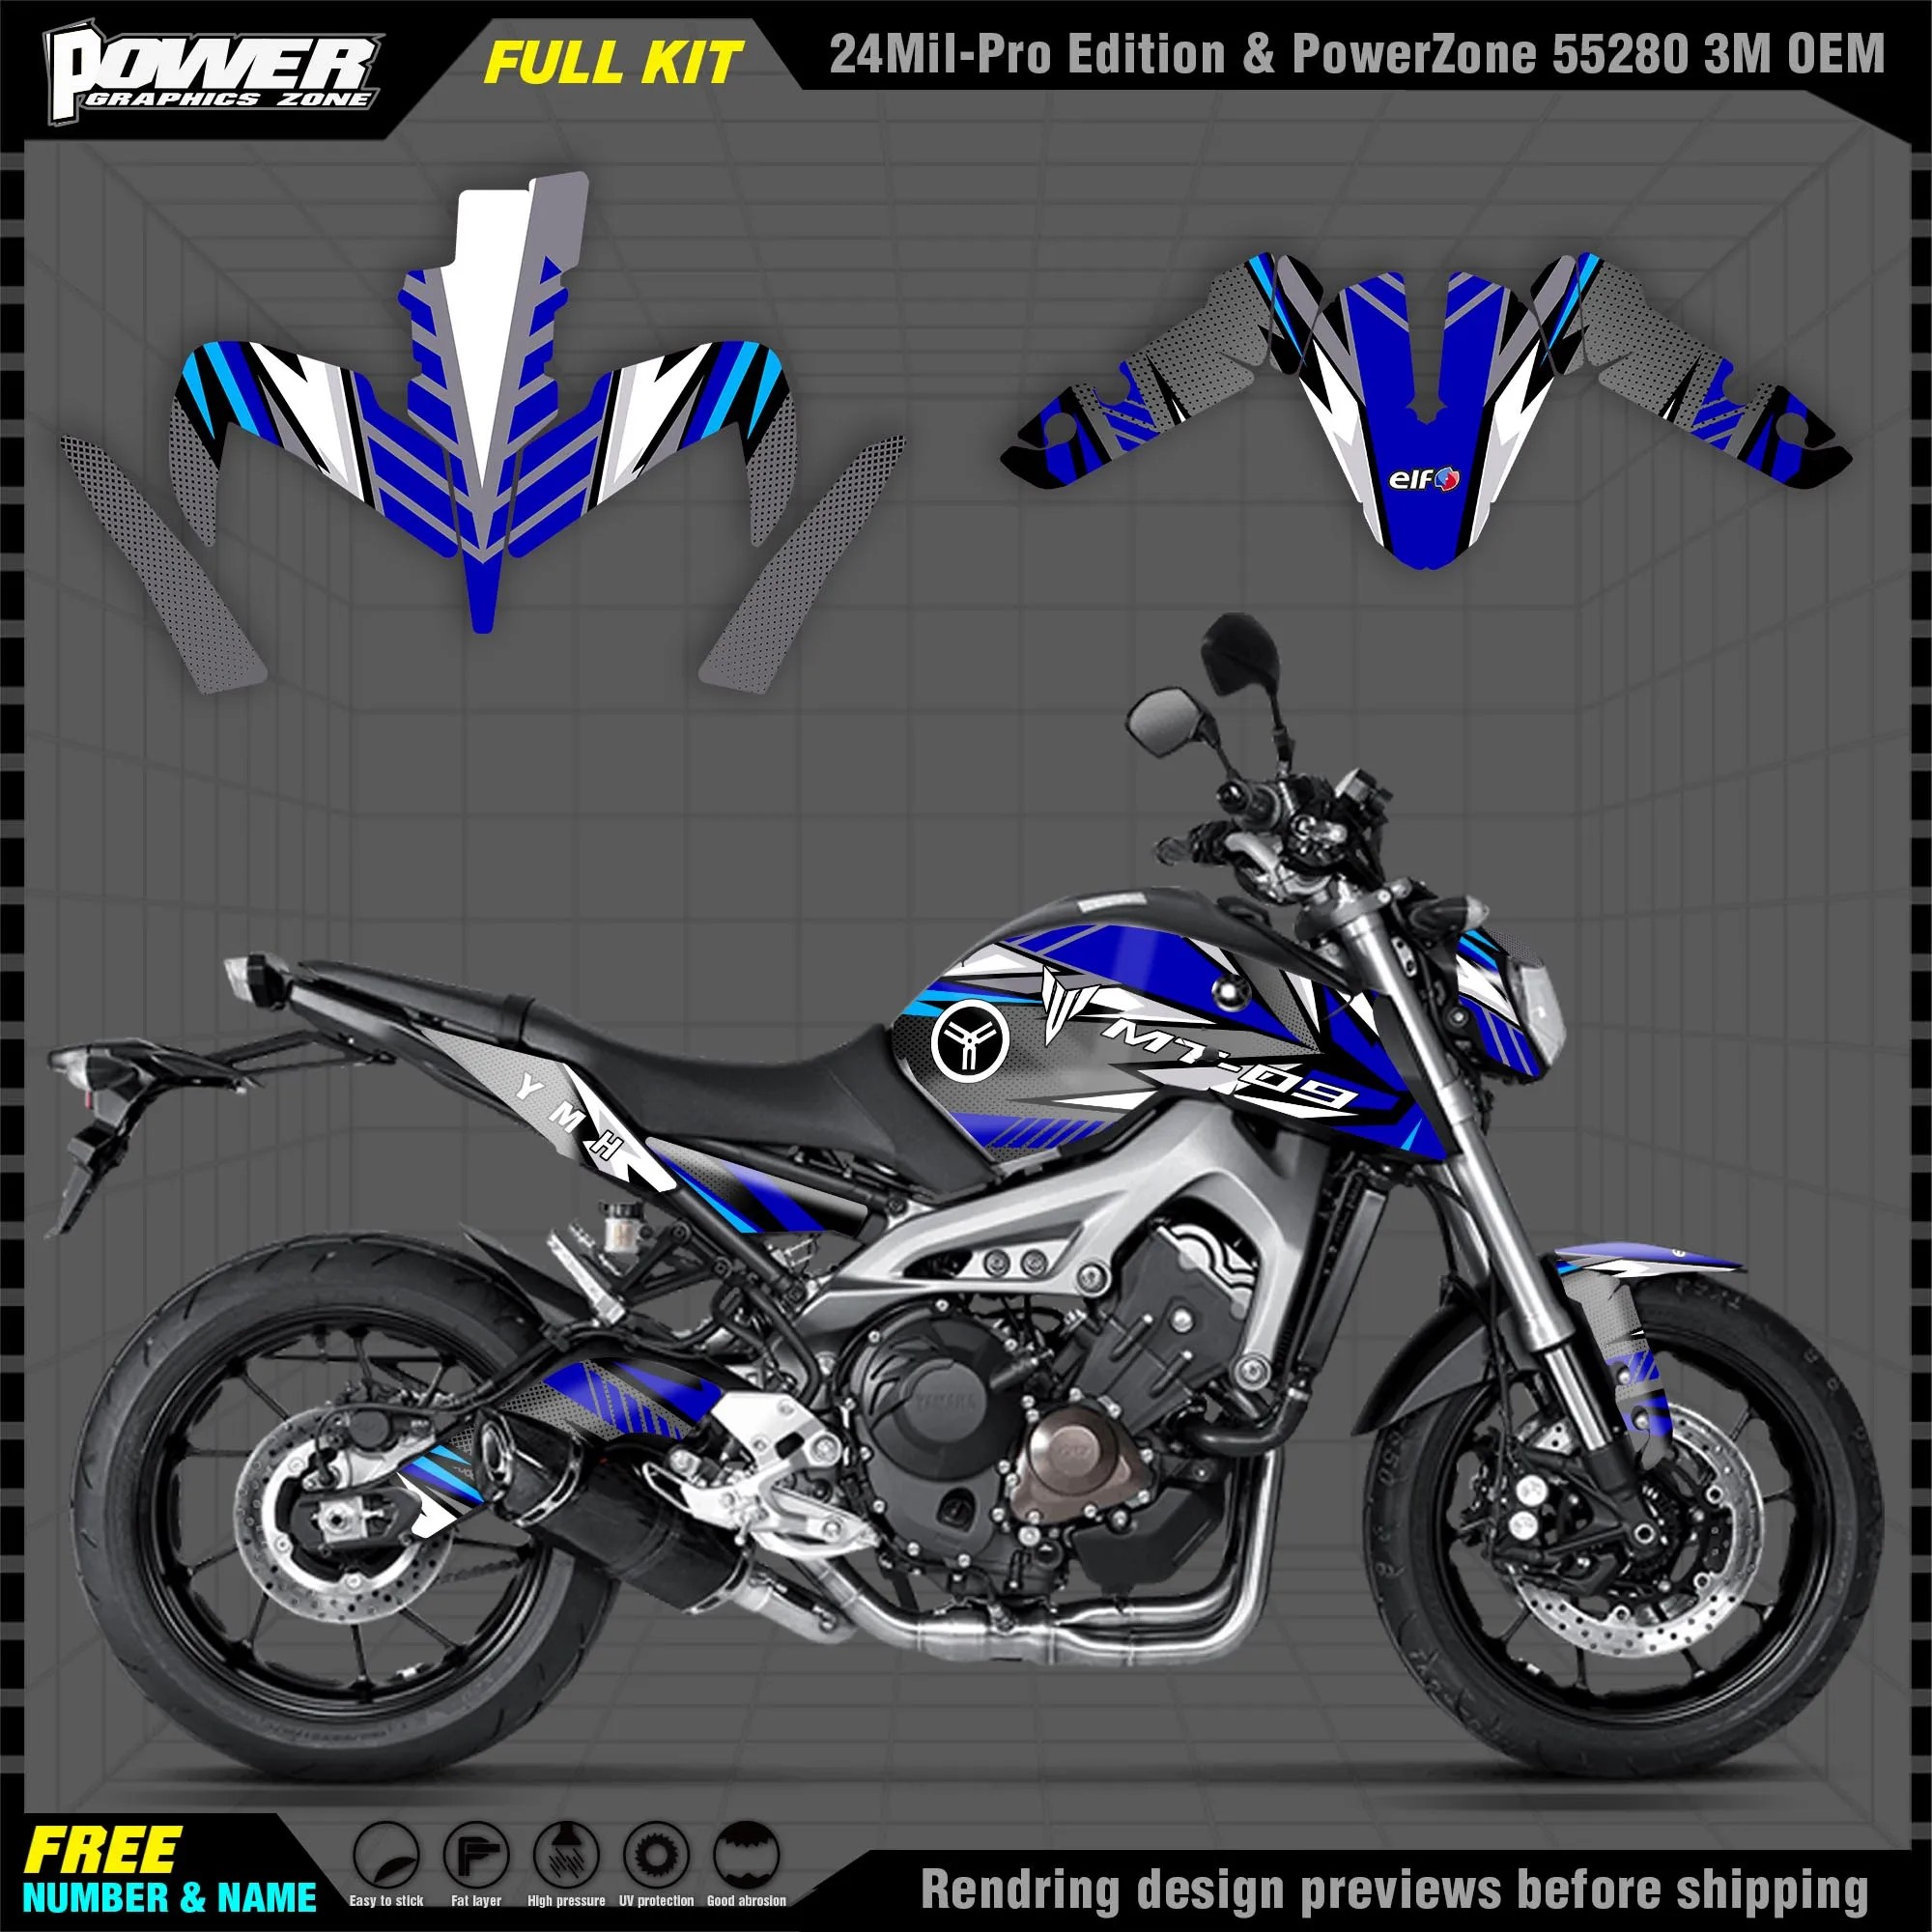 

PowerZone for Custom Team Graphics Backgrounds Decals Stickers Kit For YAMAHA 17-20 MT-09 2017-2020 Decals Stickers 004